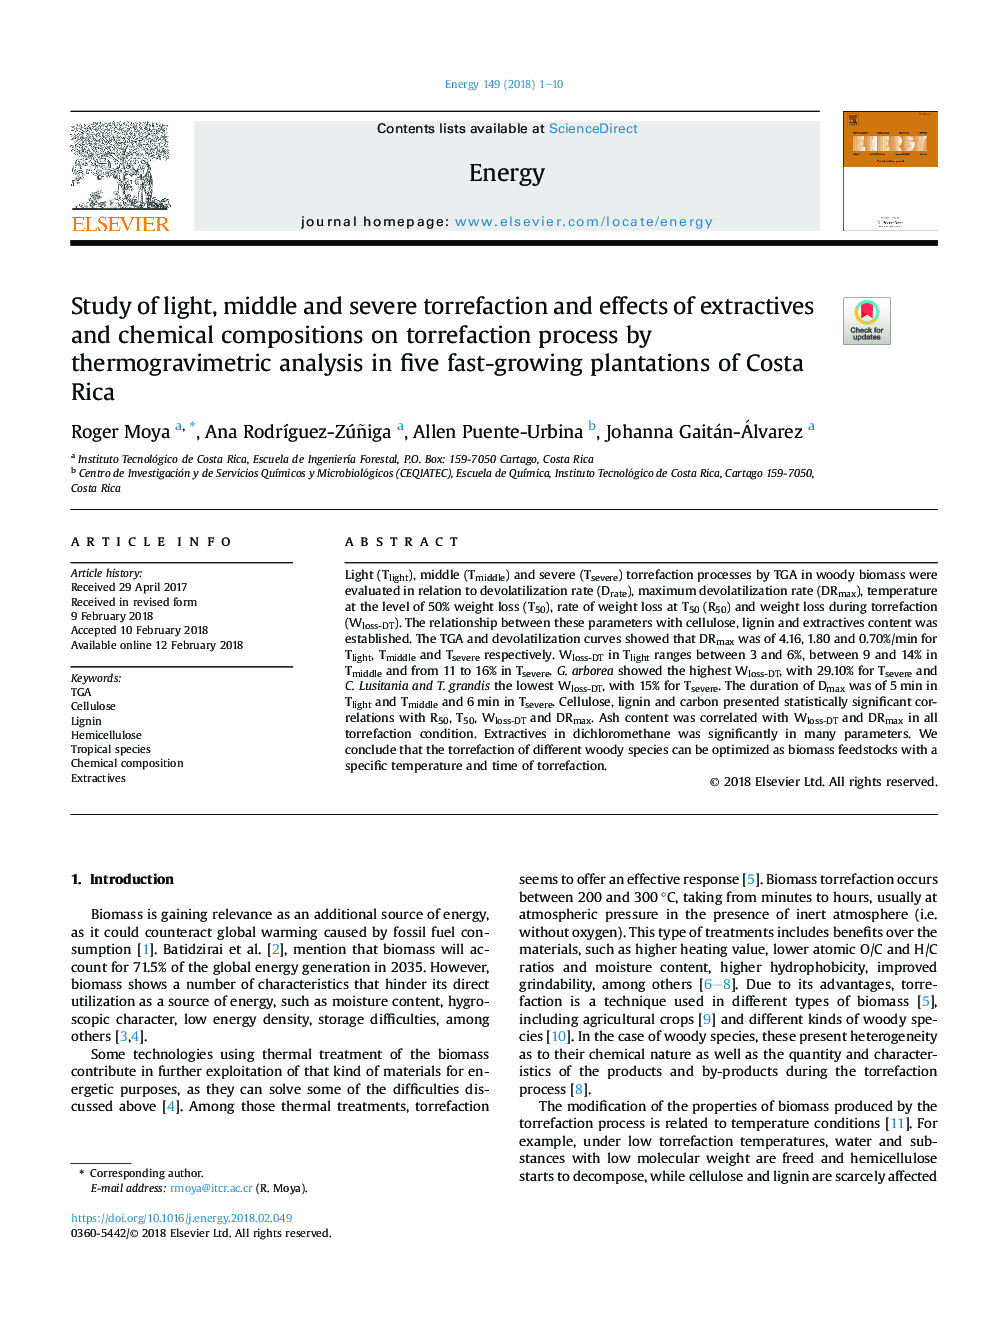 Study of light, middle and severe torrefaction and effects of extractivesÂ and chemical compositions on torrefaction process by thermogravimetric analysis in five fast-growing plantations of CostaÂ Rica